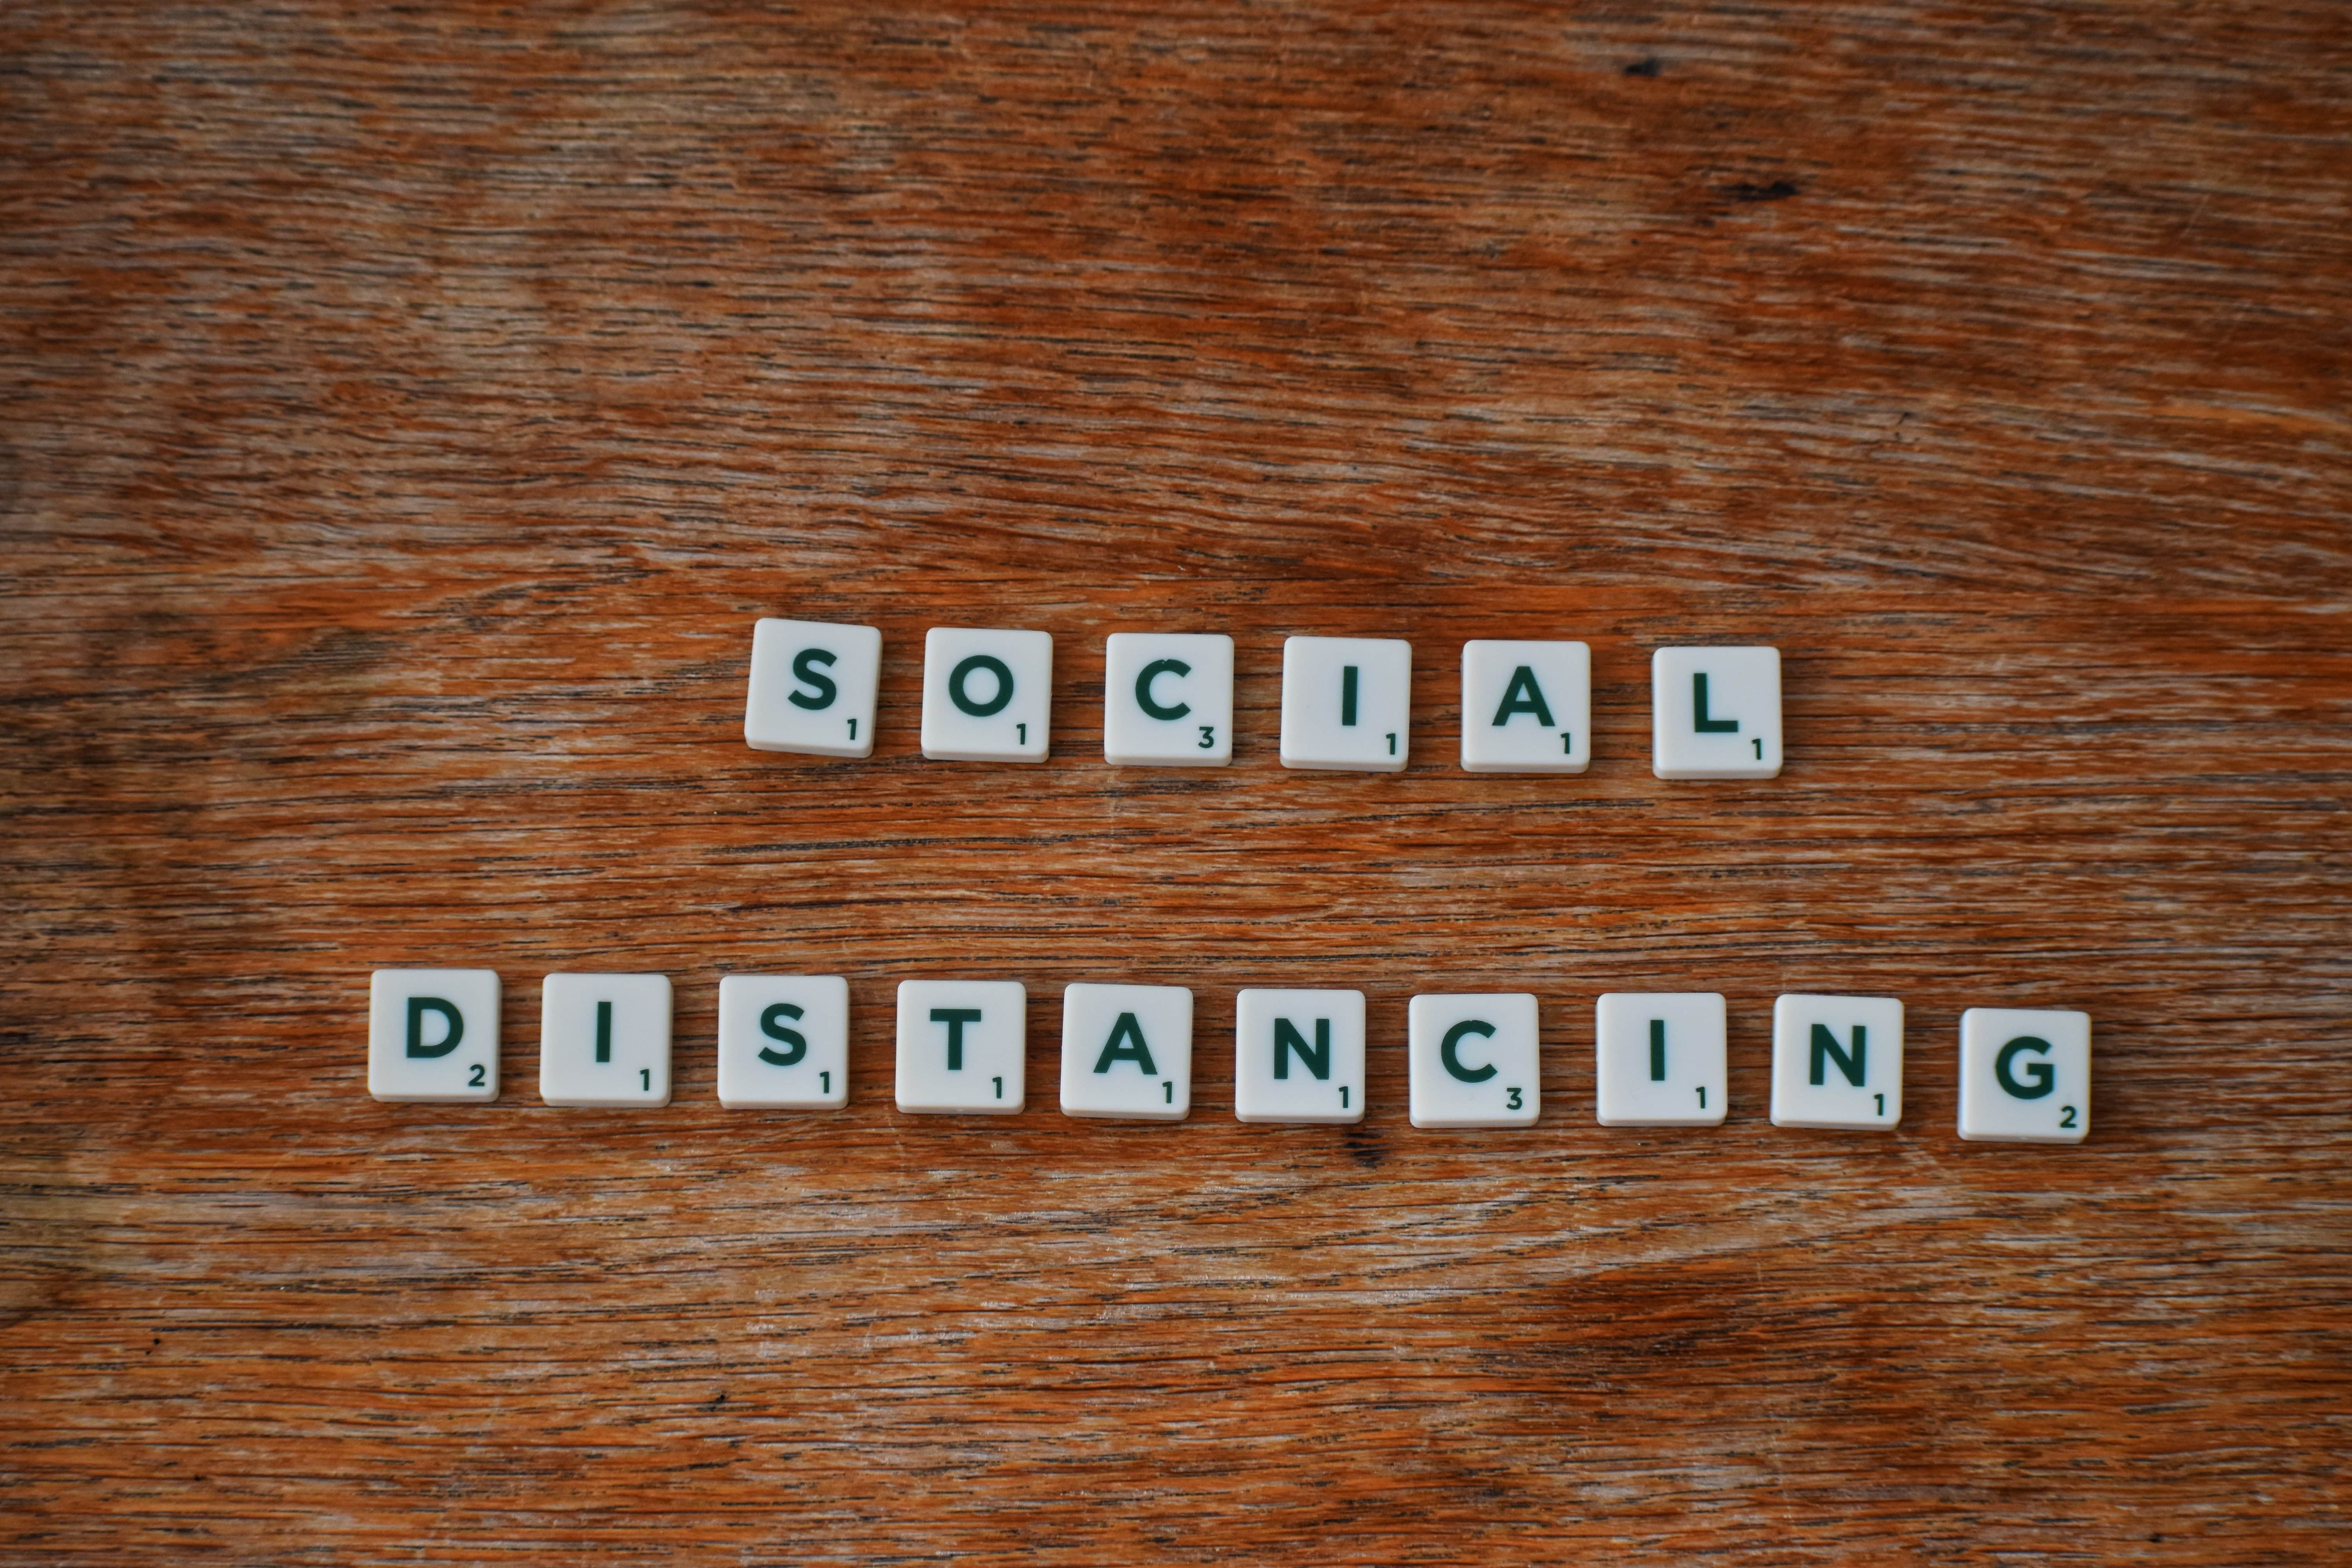 Loneliness and Social Distancing